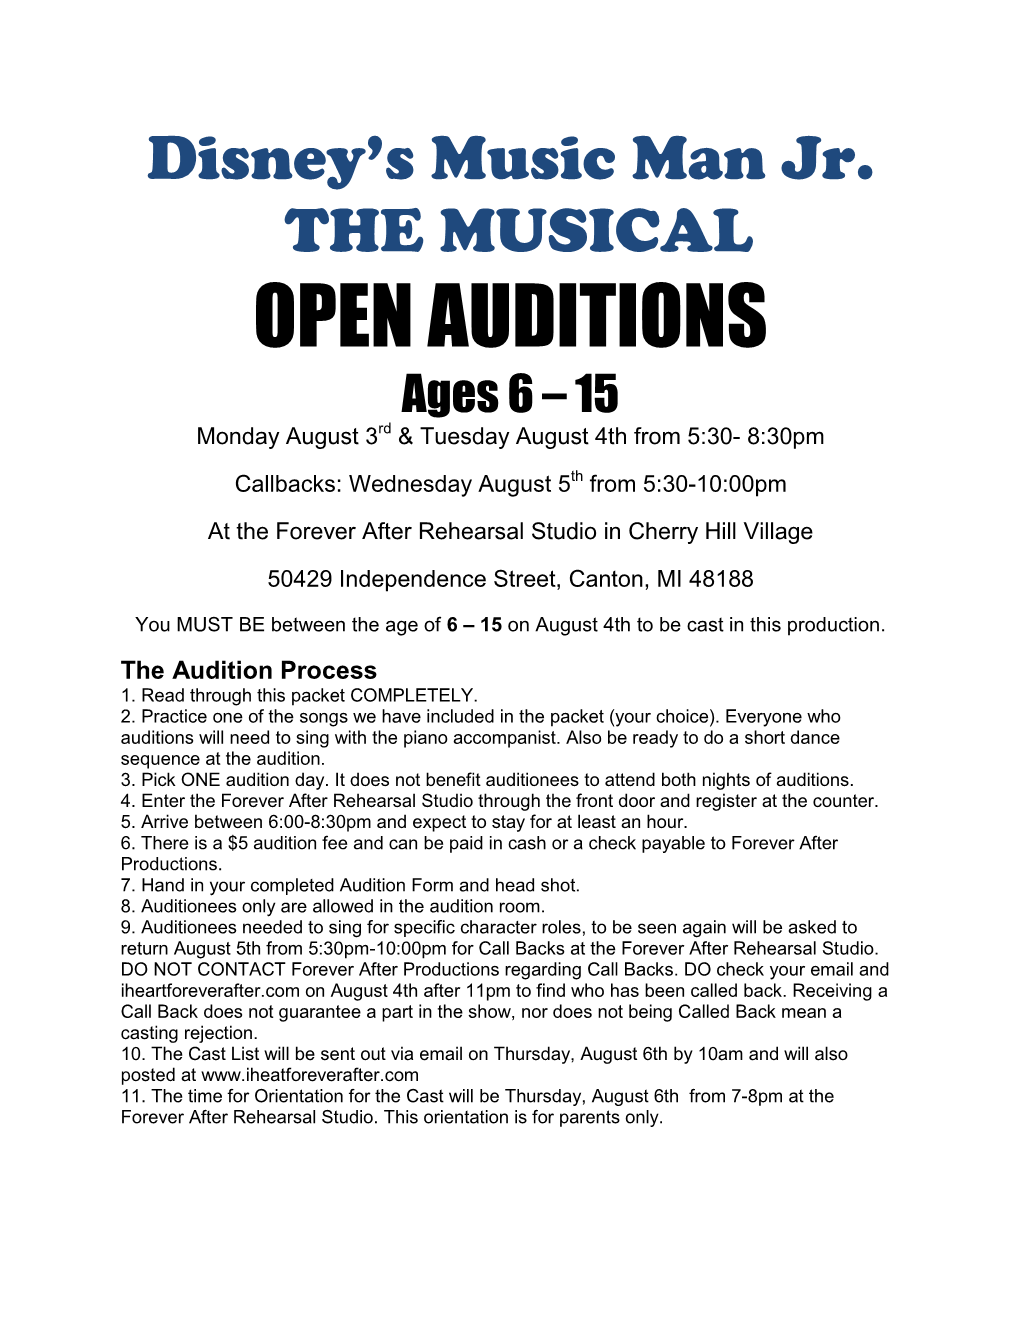 OPEN AUDITIONS Ages 6 – 15 Monday August 3Rd & Tuesday August 4Th from 5:30- 8:30Pm